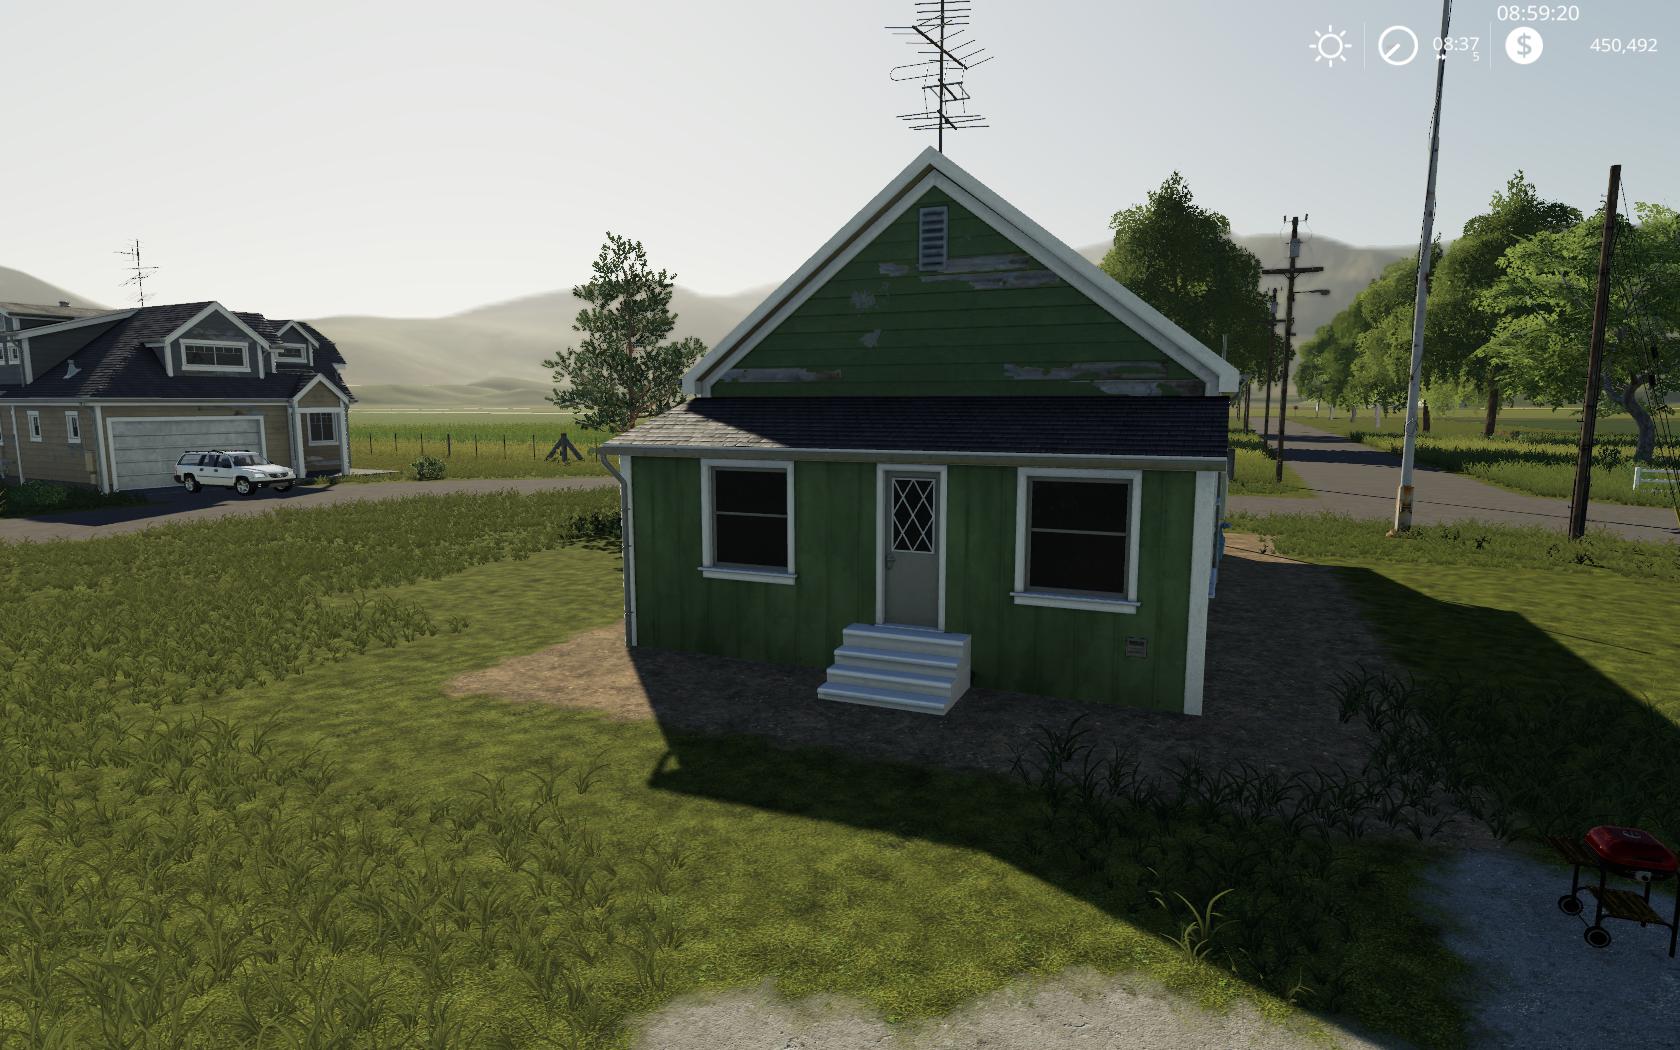 Placeable 2 bedroom house with sleep trigger v 1.0